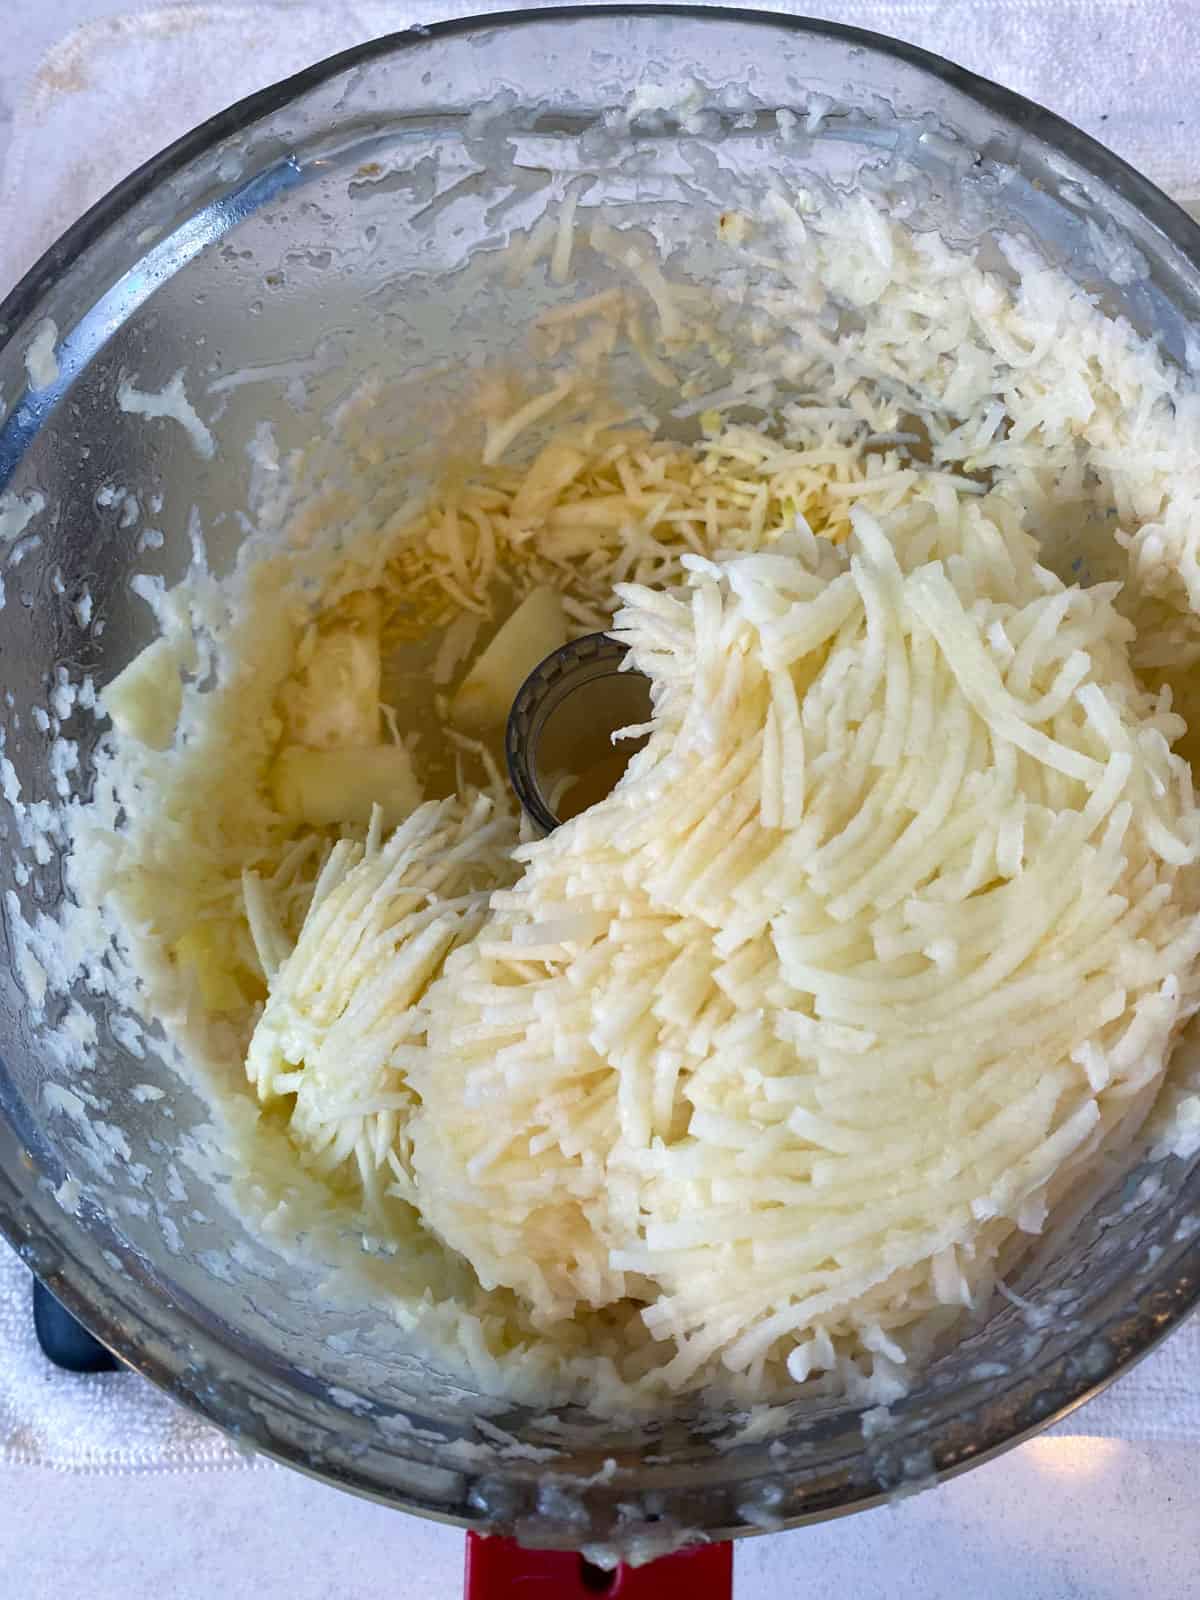 Shred the celery root and potatoes in a food processor or use a hand grater.